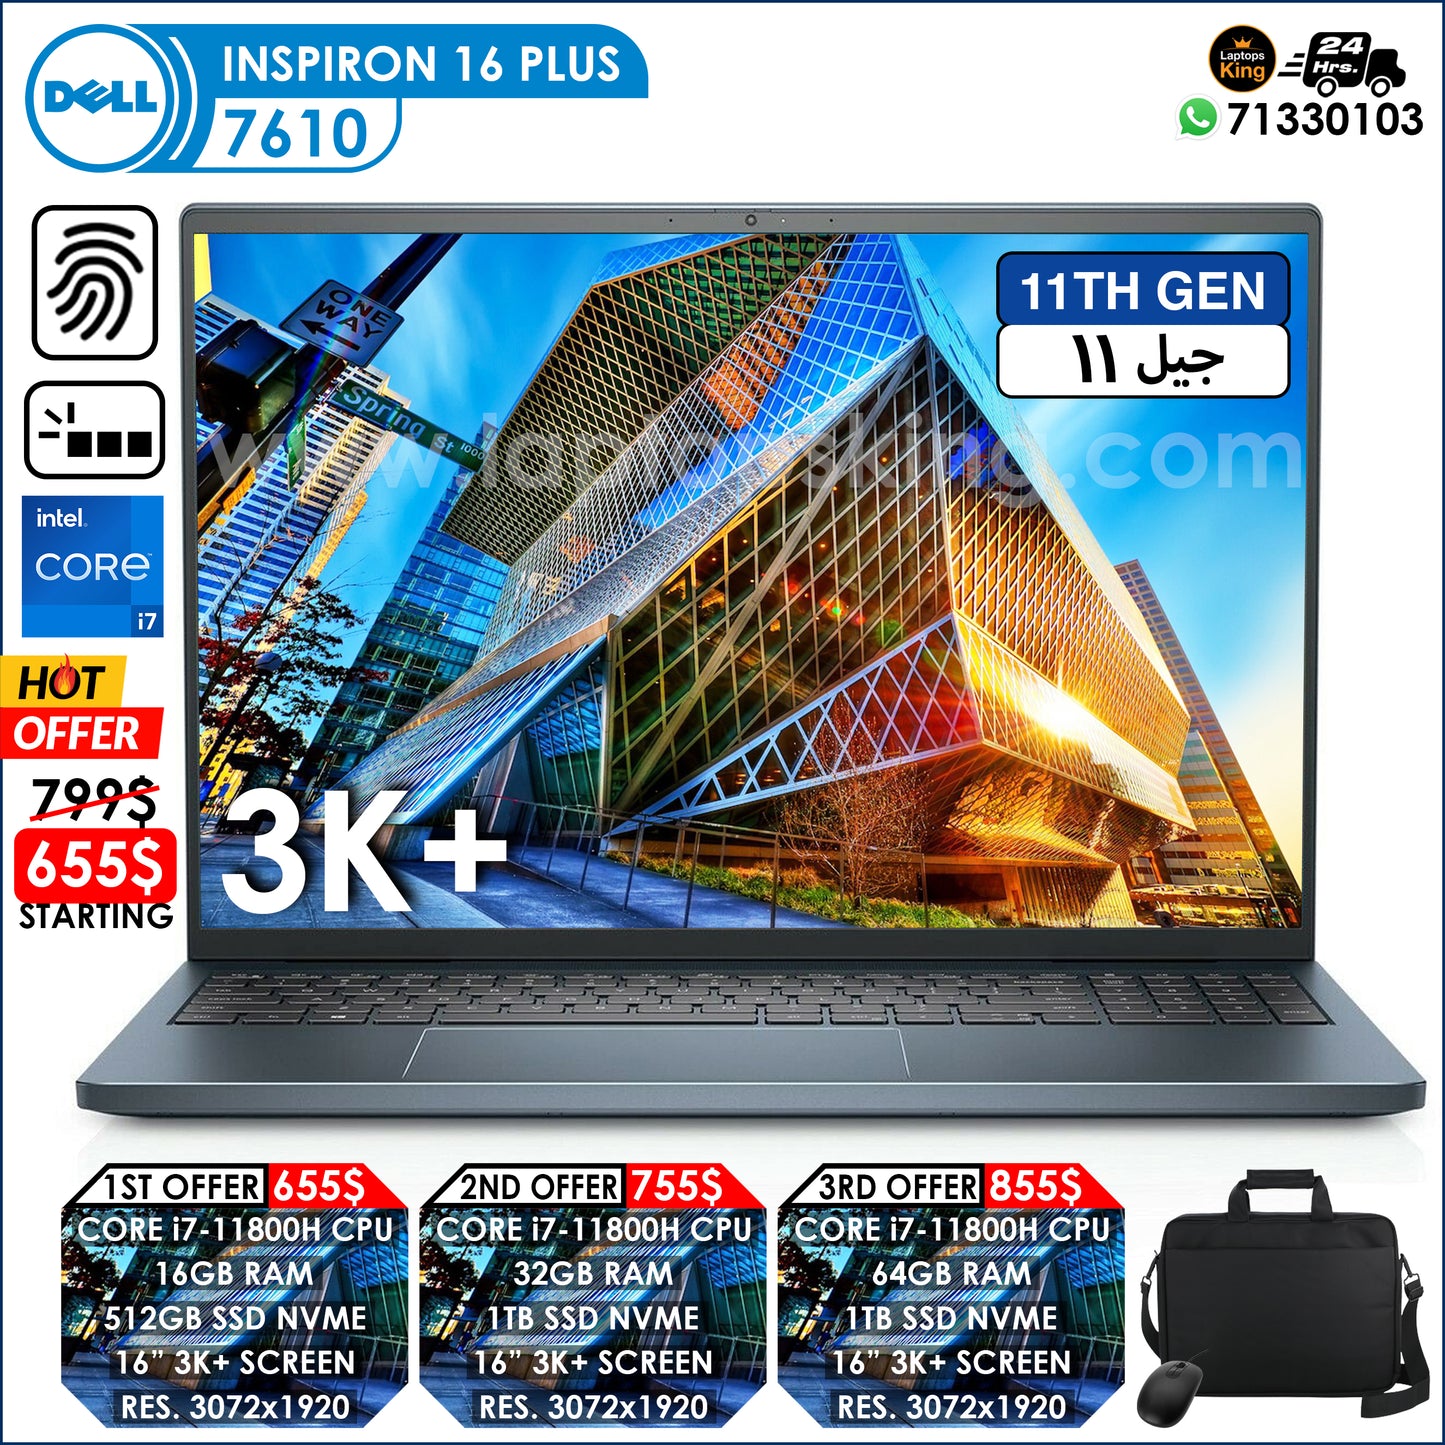 Dell Inspiron 16 Plus 7610 Core i7-11800H 16" 3k+ Laptop Offers (New OB)